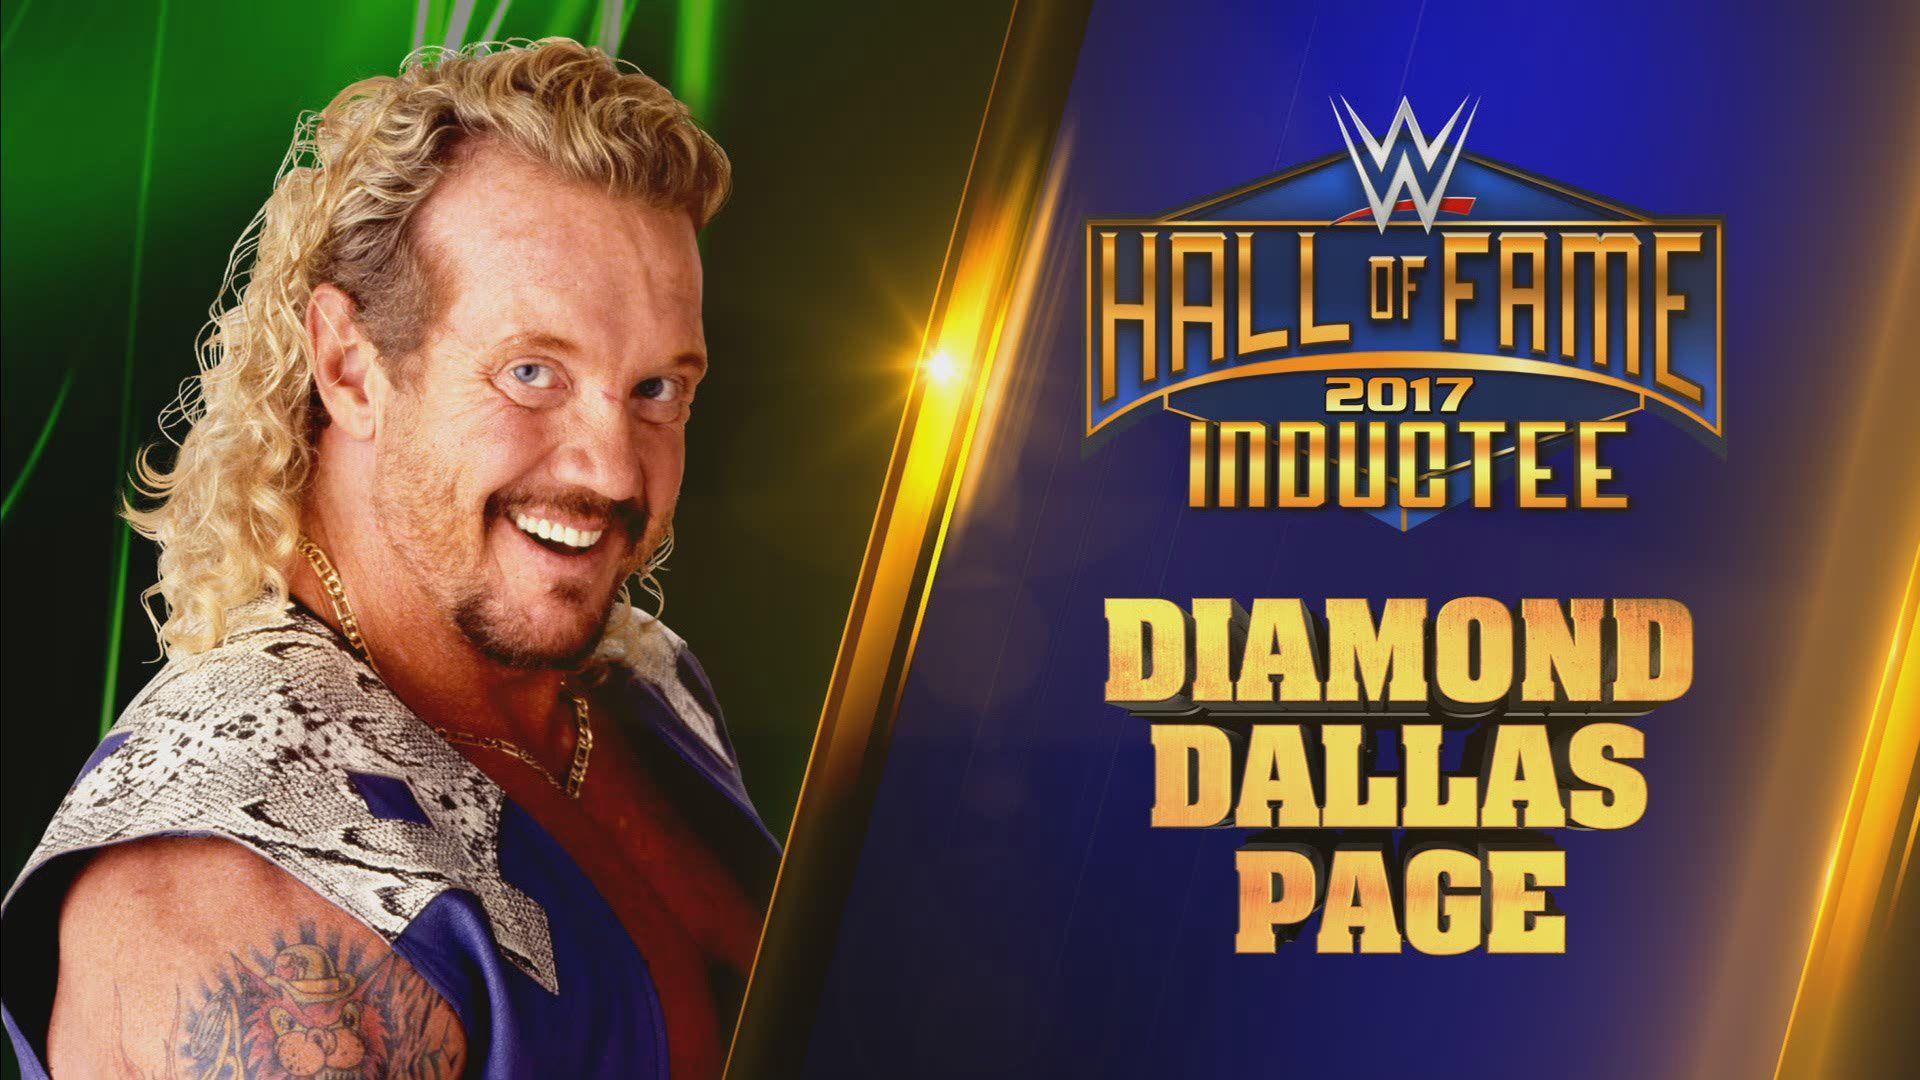 Diamond Dallas Page joins the WWE Hall of Fame Class of 2017.